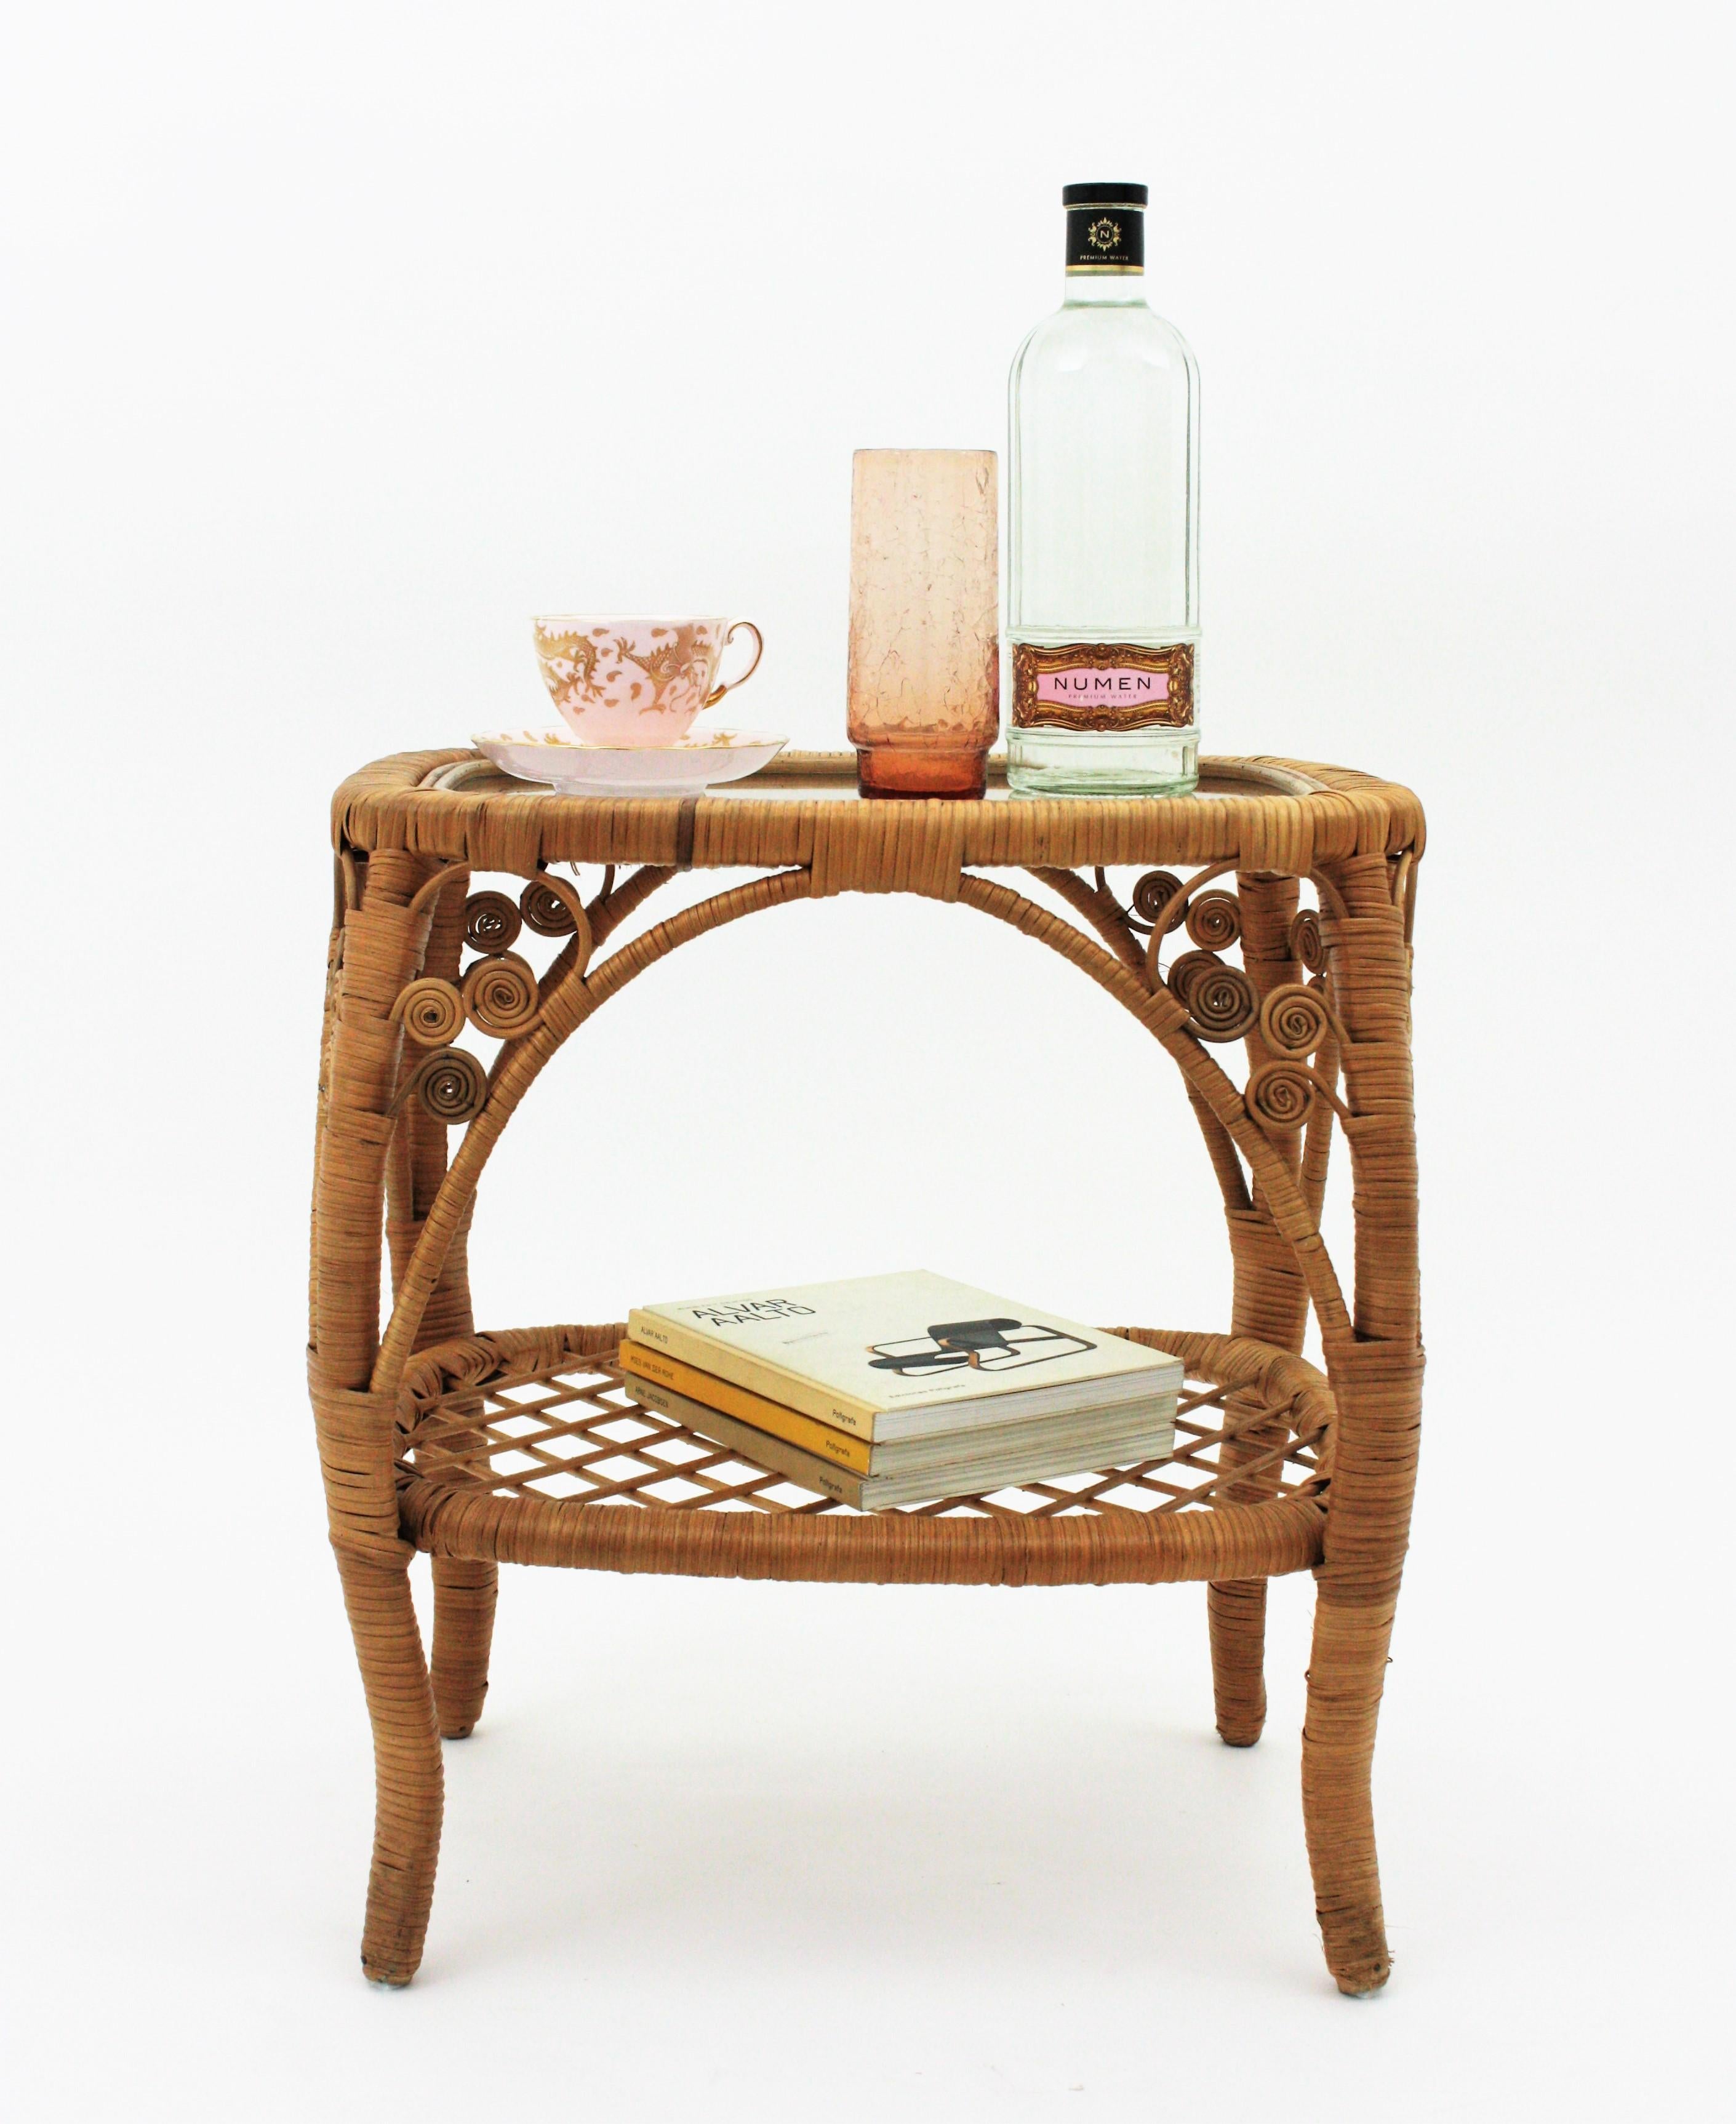 Spanish Nightstand Table , Rattan, Wicker, 1960s
Lovely wicker and rattan side table / bedside table / night stand / drinks table with filigree peacock details and glass top,
This table has a beautiful artistic filigree peacock and scrolled